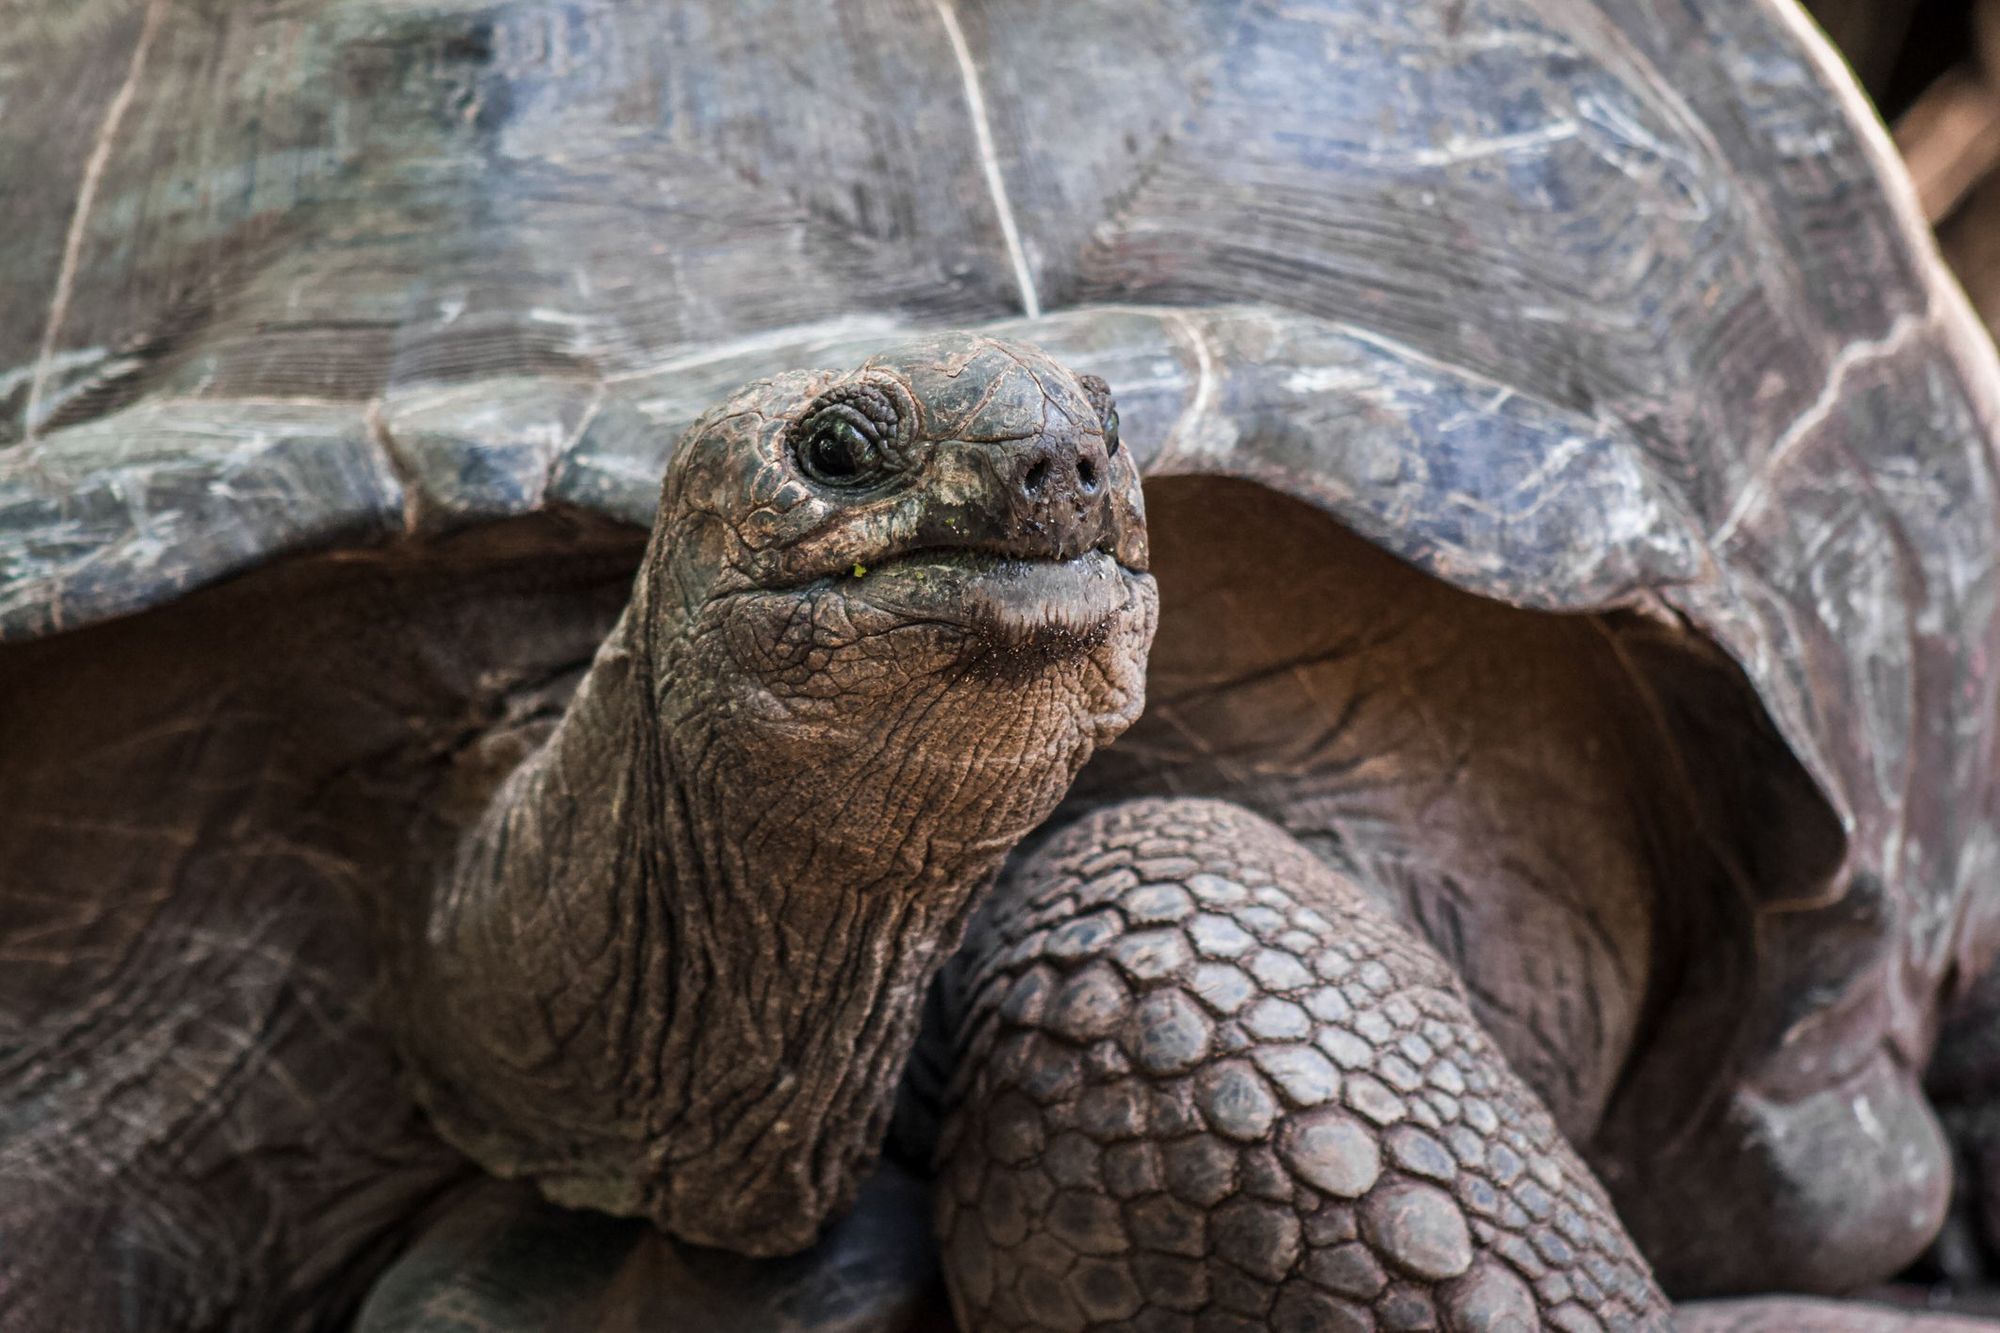 A close up of a giant Aldabra tortoise.